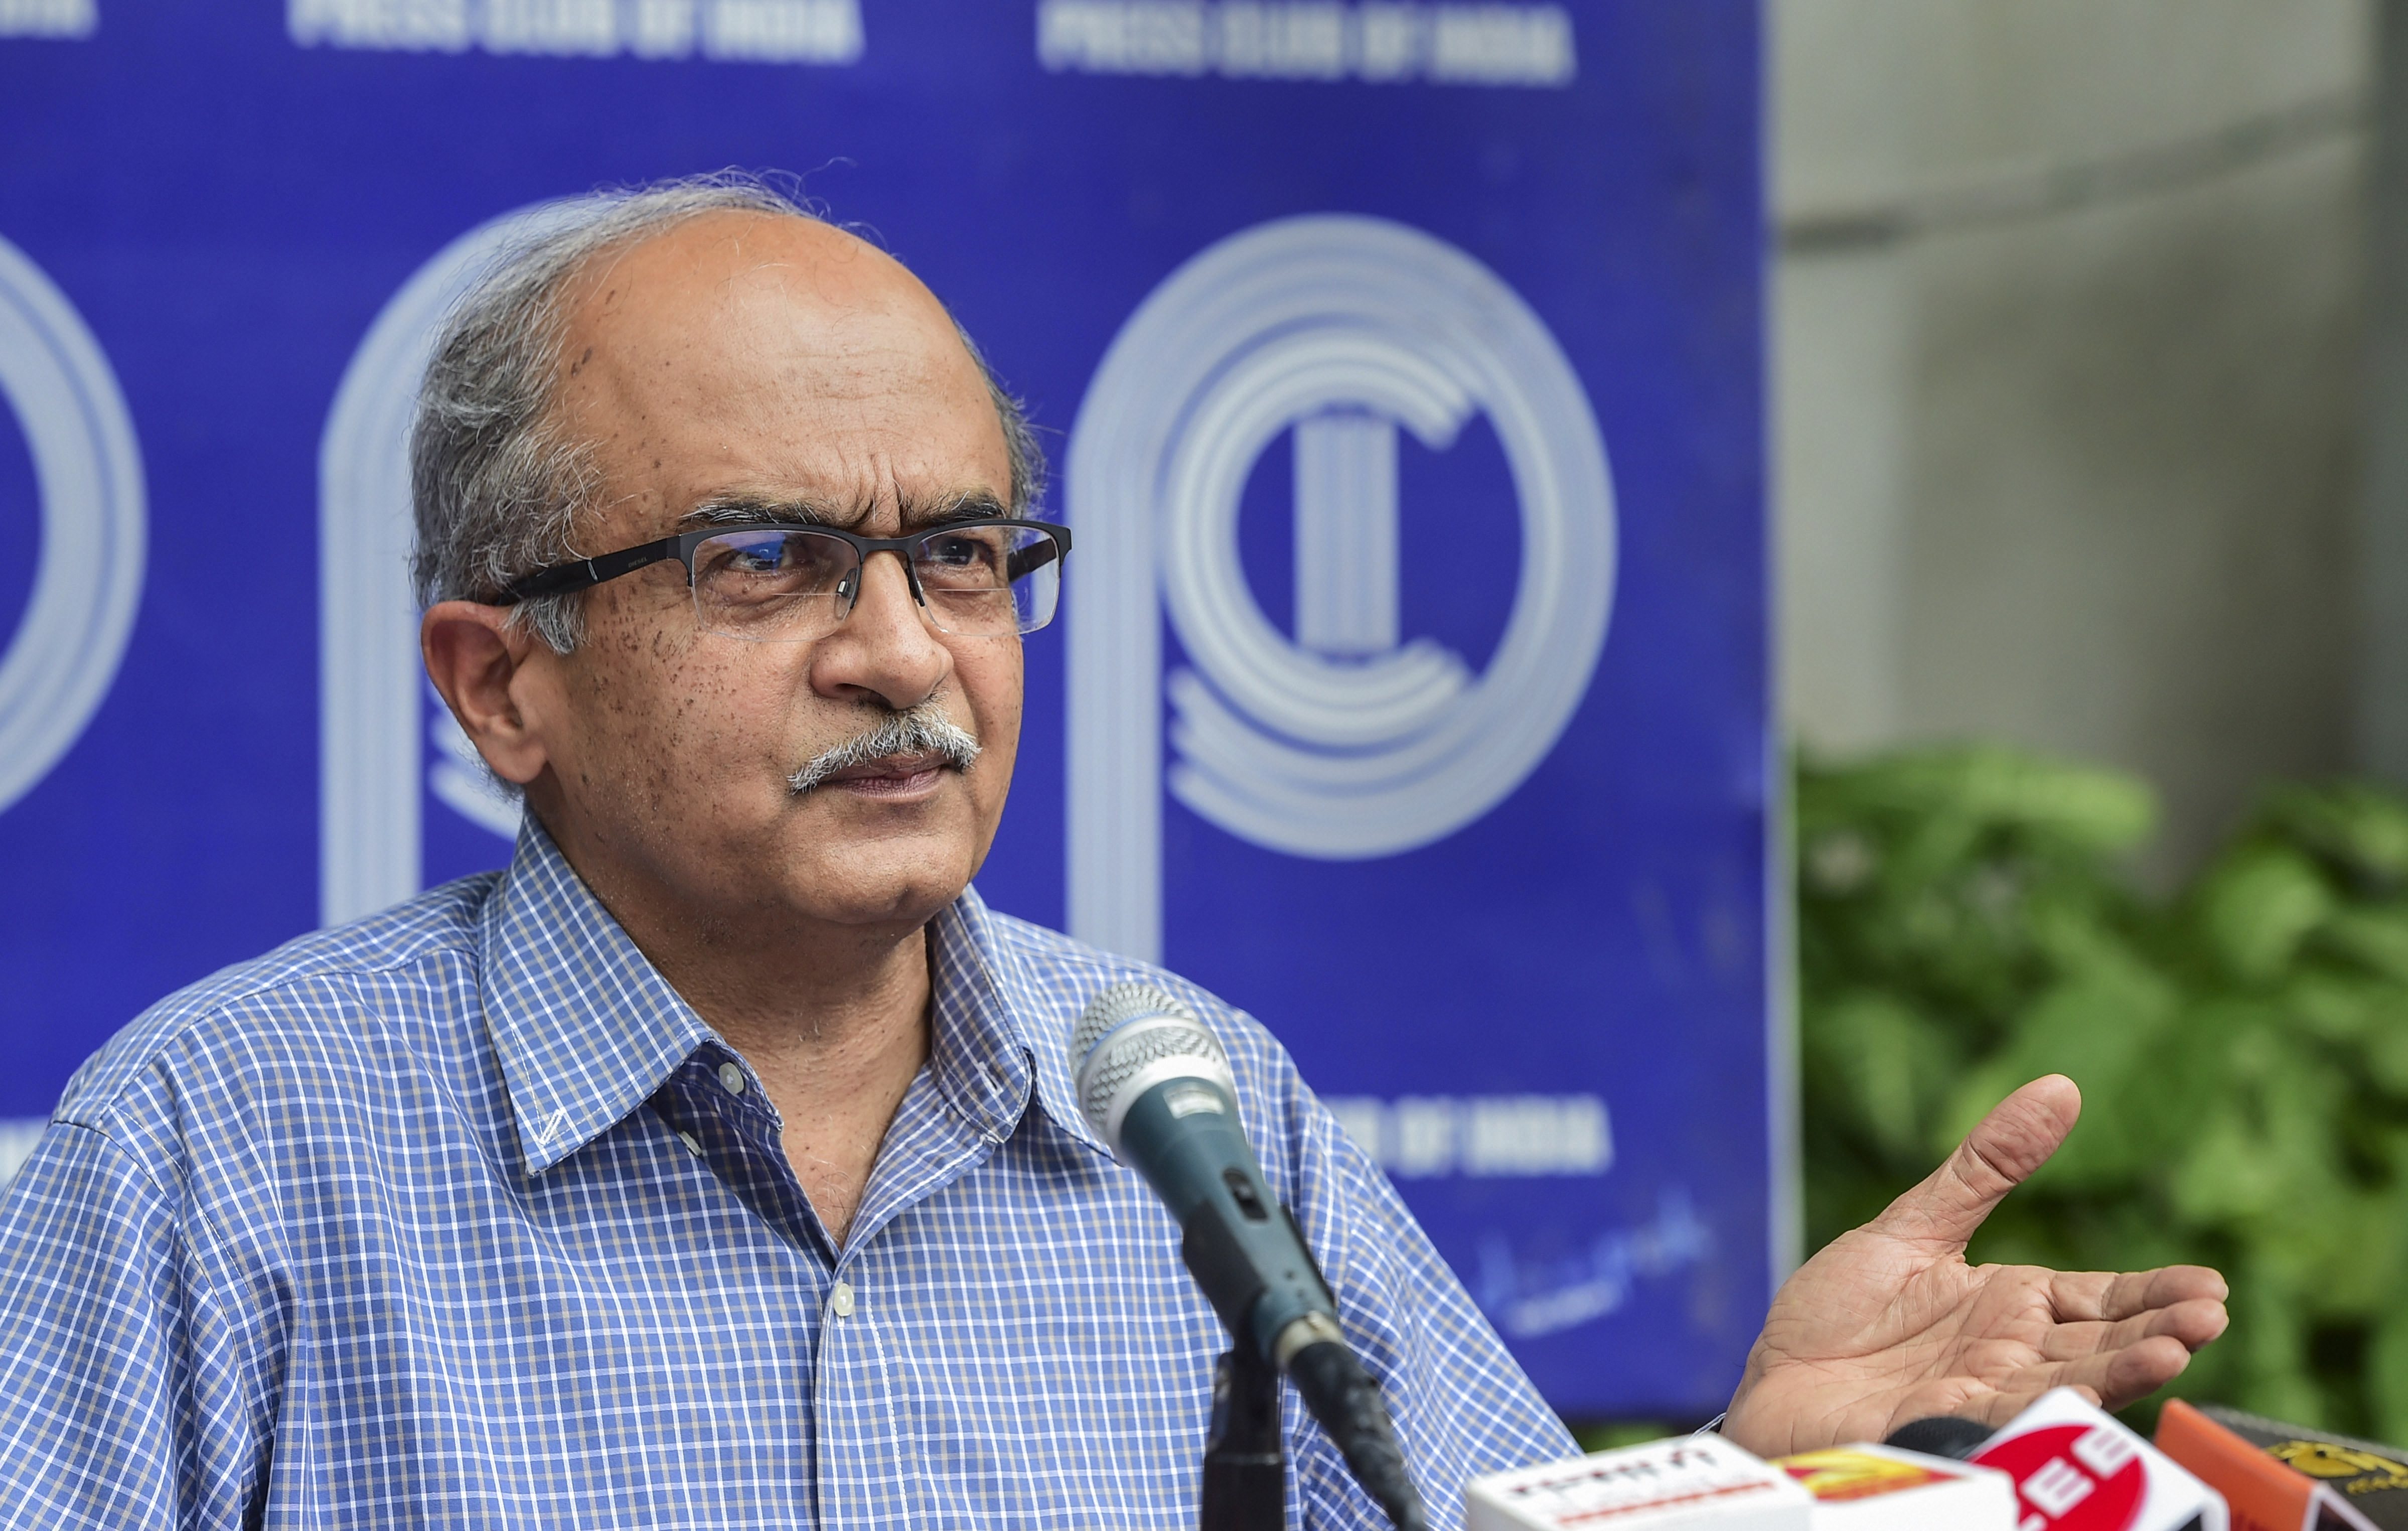 New Delhi: Activist-lawyer Prashant Bhushan addreses a press conference, after Supreme Court imposed a token fine of one rupee as punishment in a contempt case against him, in New Delhi, Monday, Aug. 31, 2020. (PTI Photo/Kamal Kishore)(PTI31-08-2020_000105B)